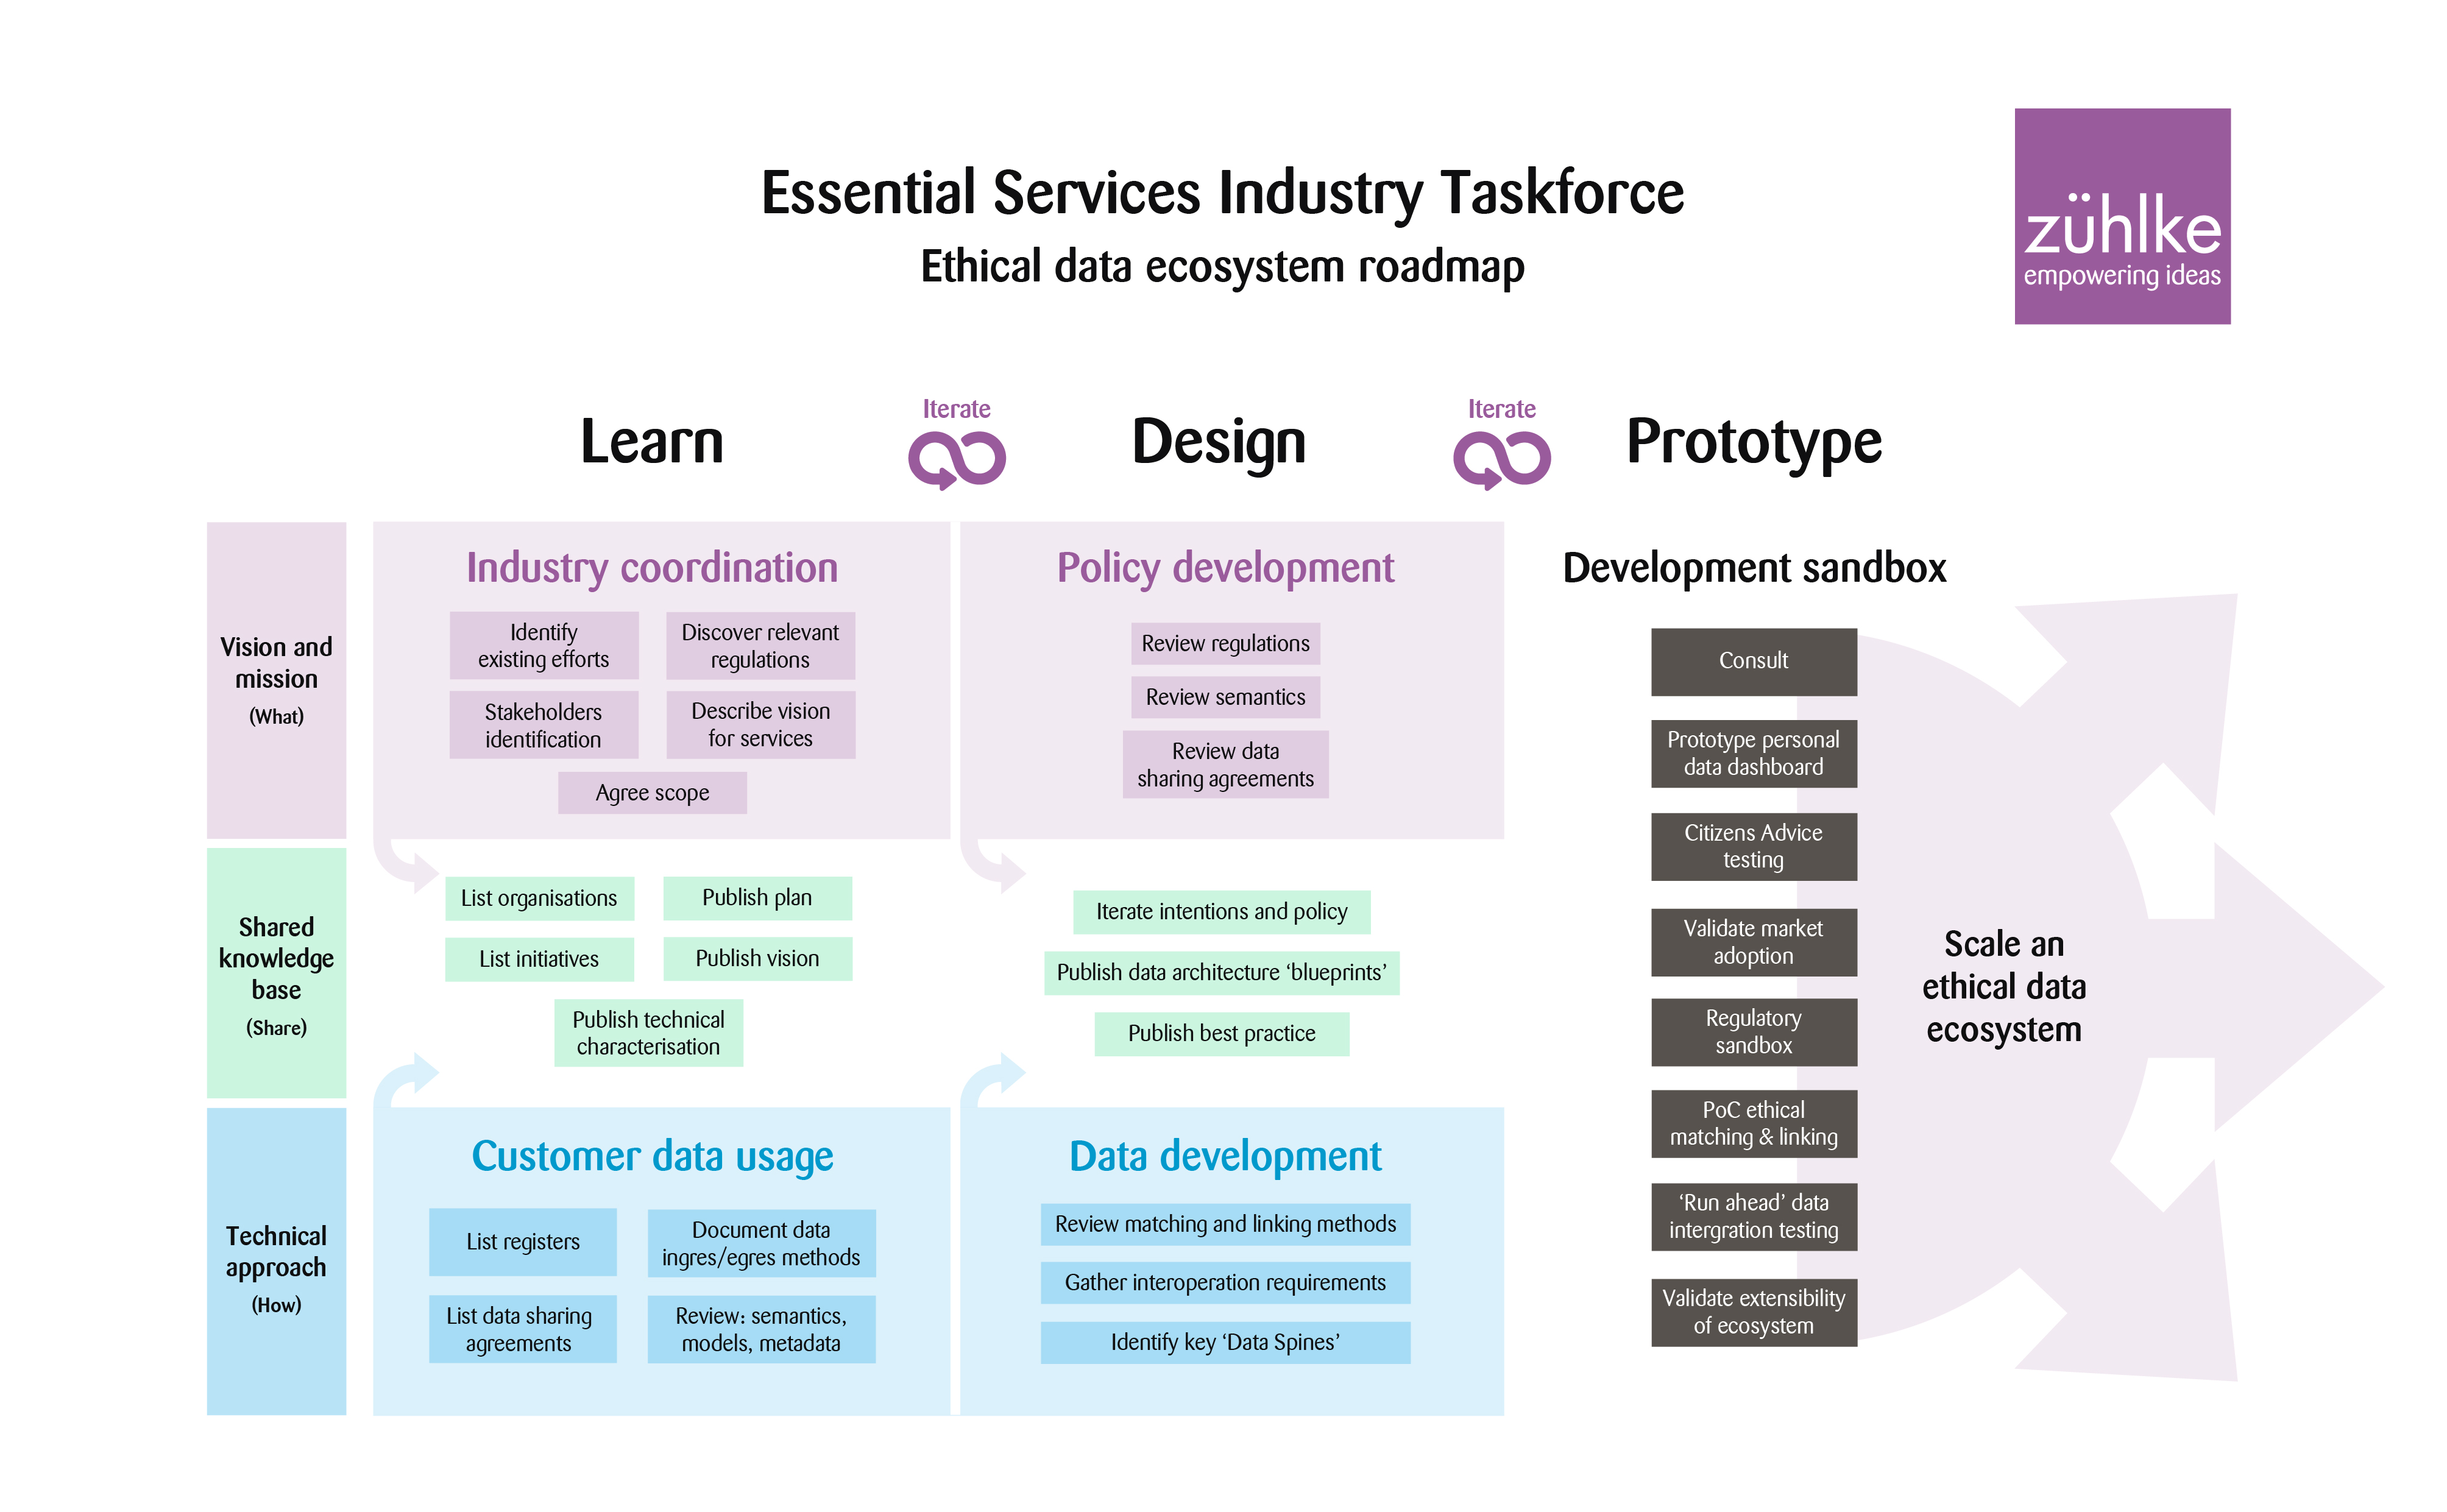 Essential services industry Taskforce ethical data ecosystem roadmap